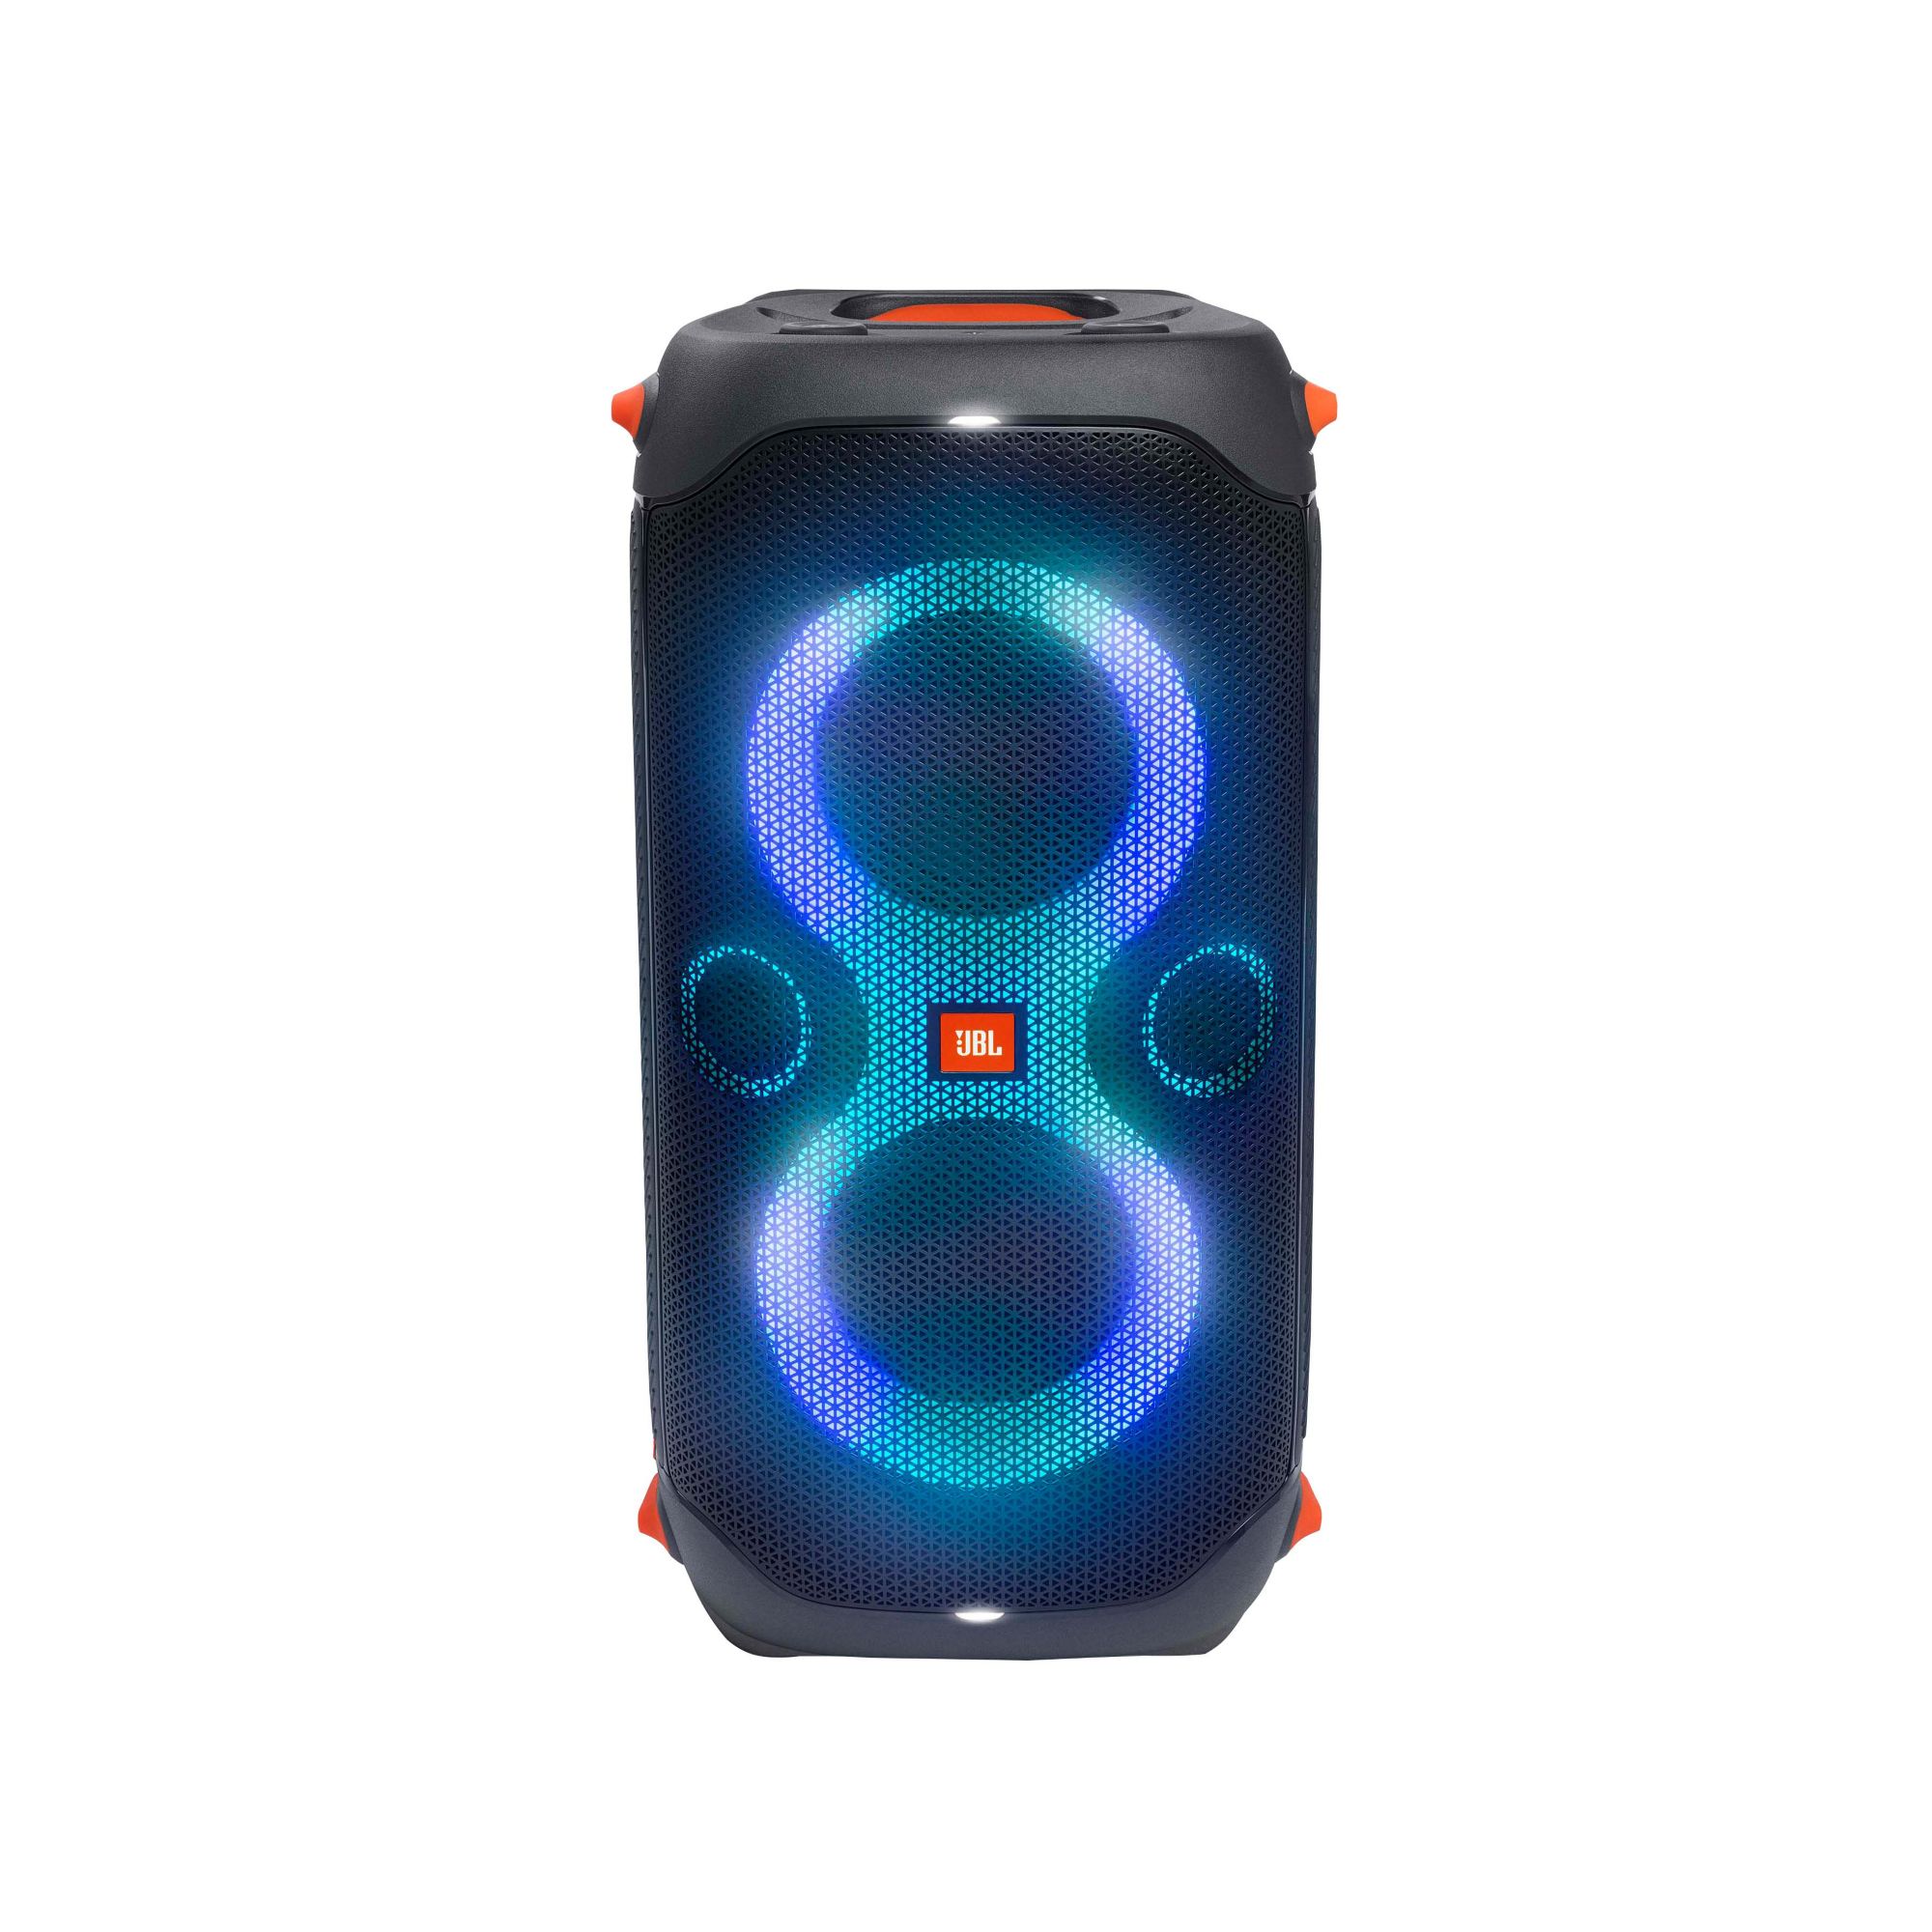 Buy JBL Partybox 110 Party Speaker with Dynamic light show that